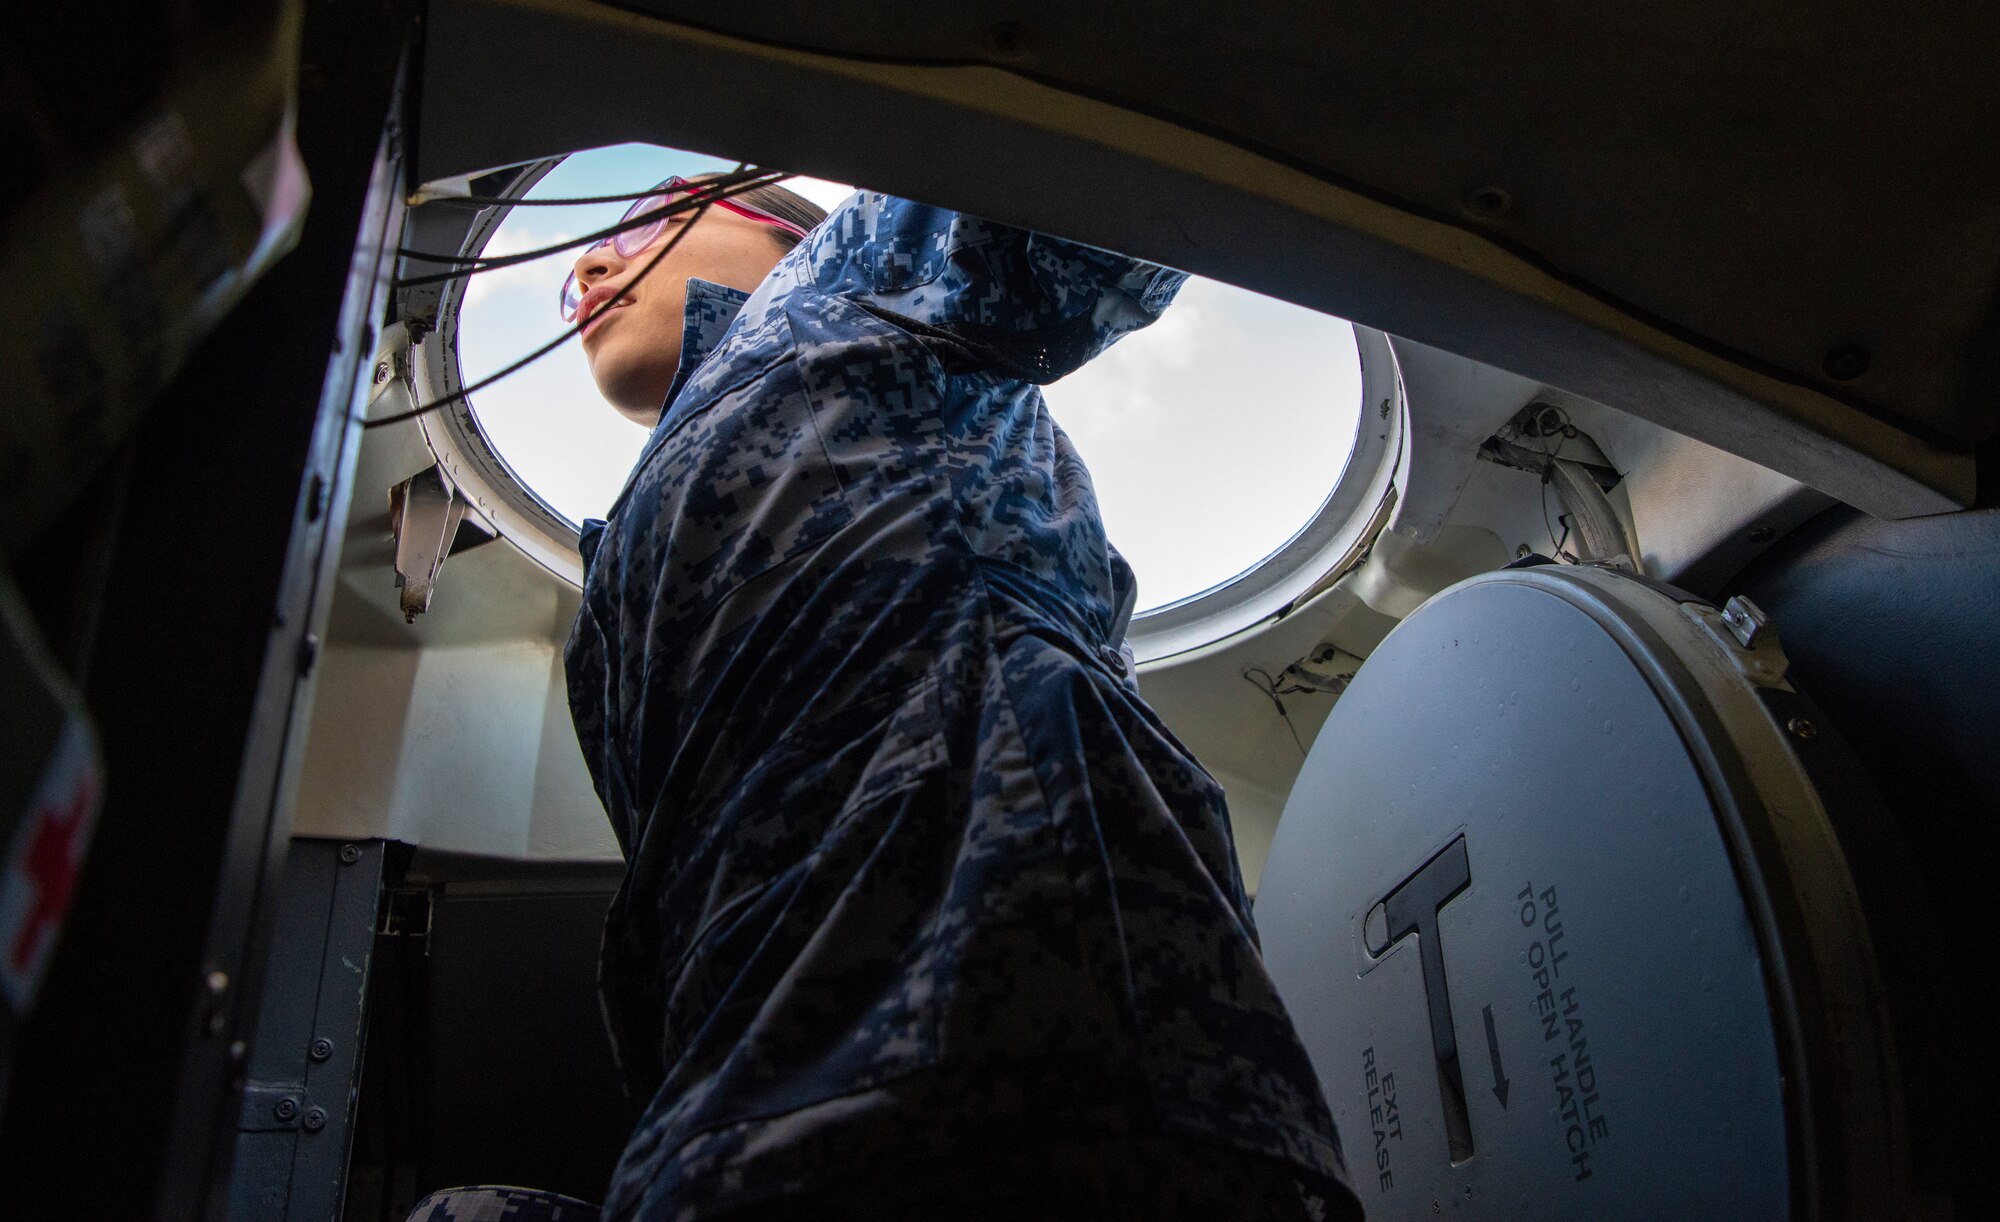 Beatriz Rosette Rivera, Mexican cadet, looks out of a C-5M Super Galaxy Number 1 Escape Hatch during their visit Oct. 17, 2019, to Dover Air Force Base, Del. Two of the top senior cadets were selected from 11 different Latin American air force academies to attend the Latin American Cadet initiative. (U.S. Air Force photo by Senior Airman Christopher Quail)